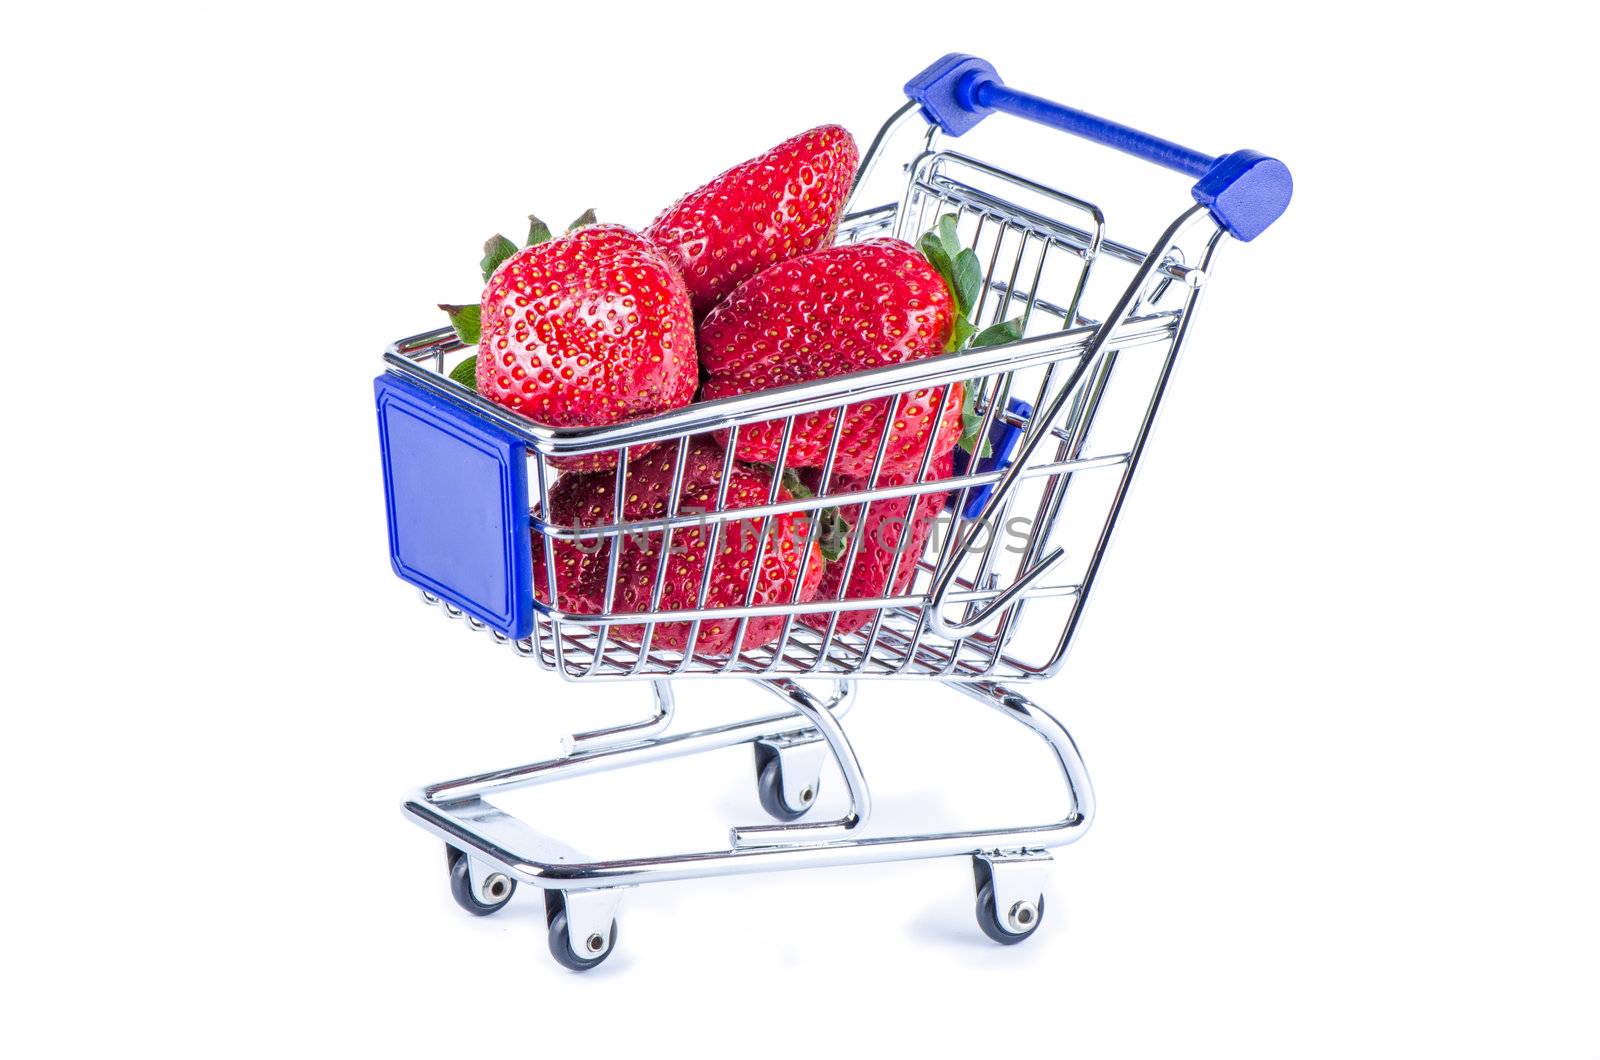 Shopping cart with strawberries by Nanisimova